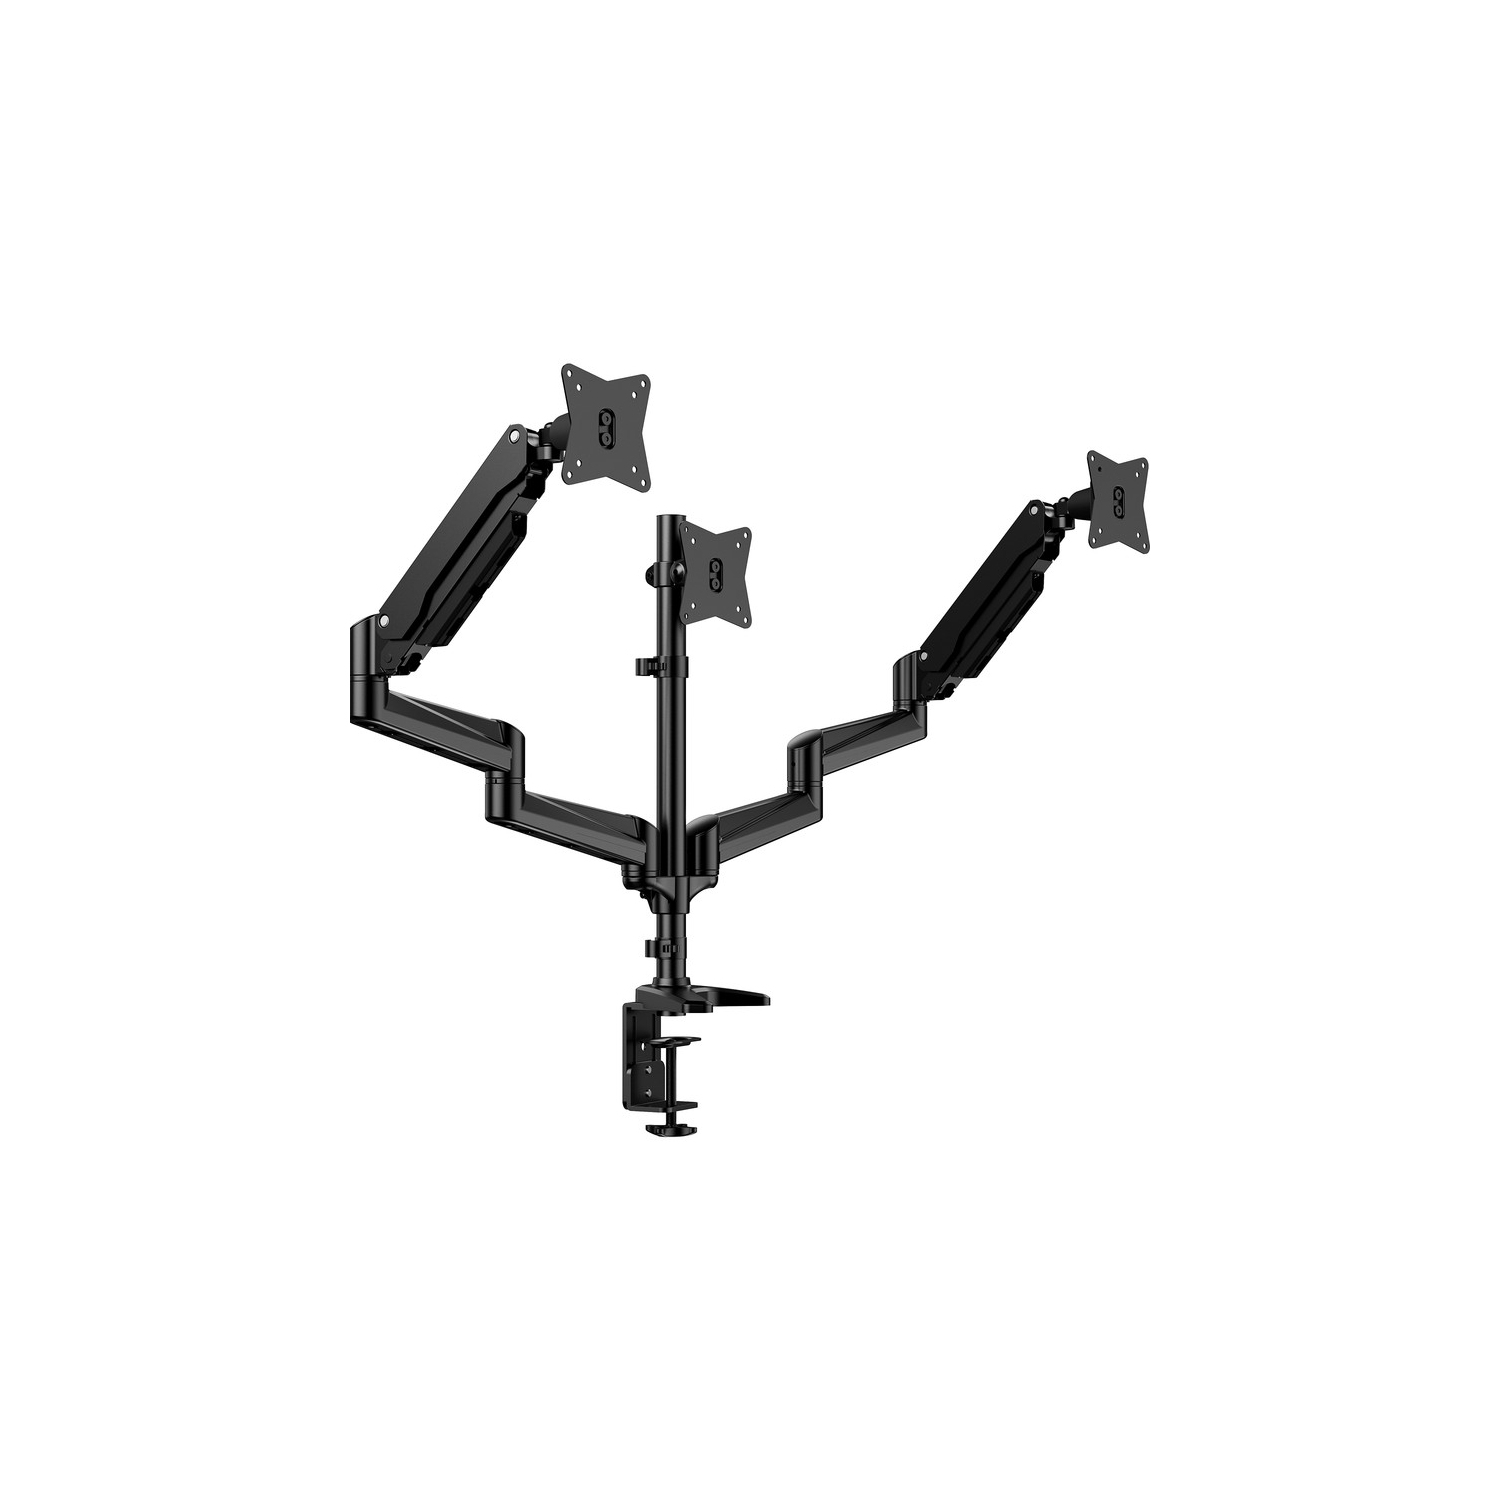 HUANUO Triple Monitor Stand, Adjustable Gas Spring Mount for 17 to 32 Inch Screens, Computer Desk Mount